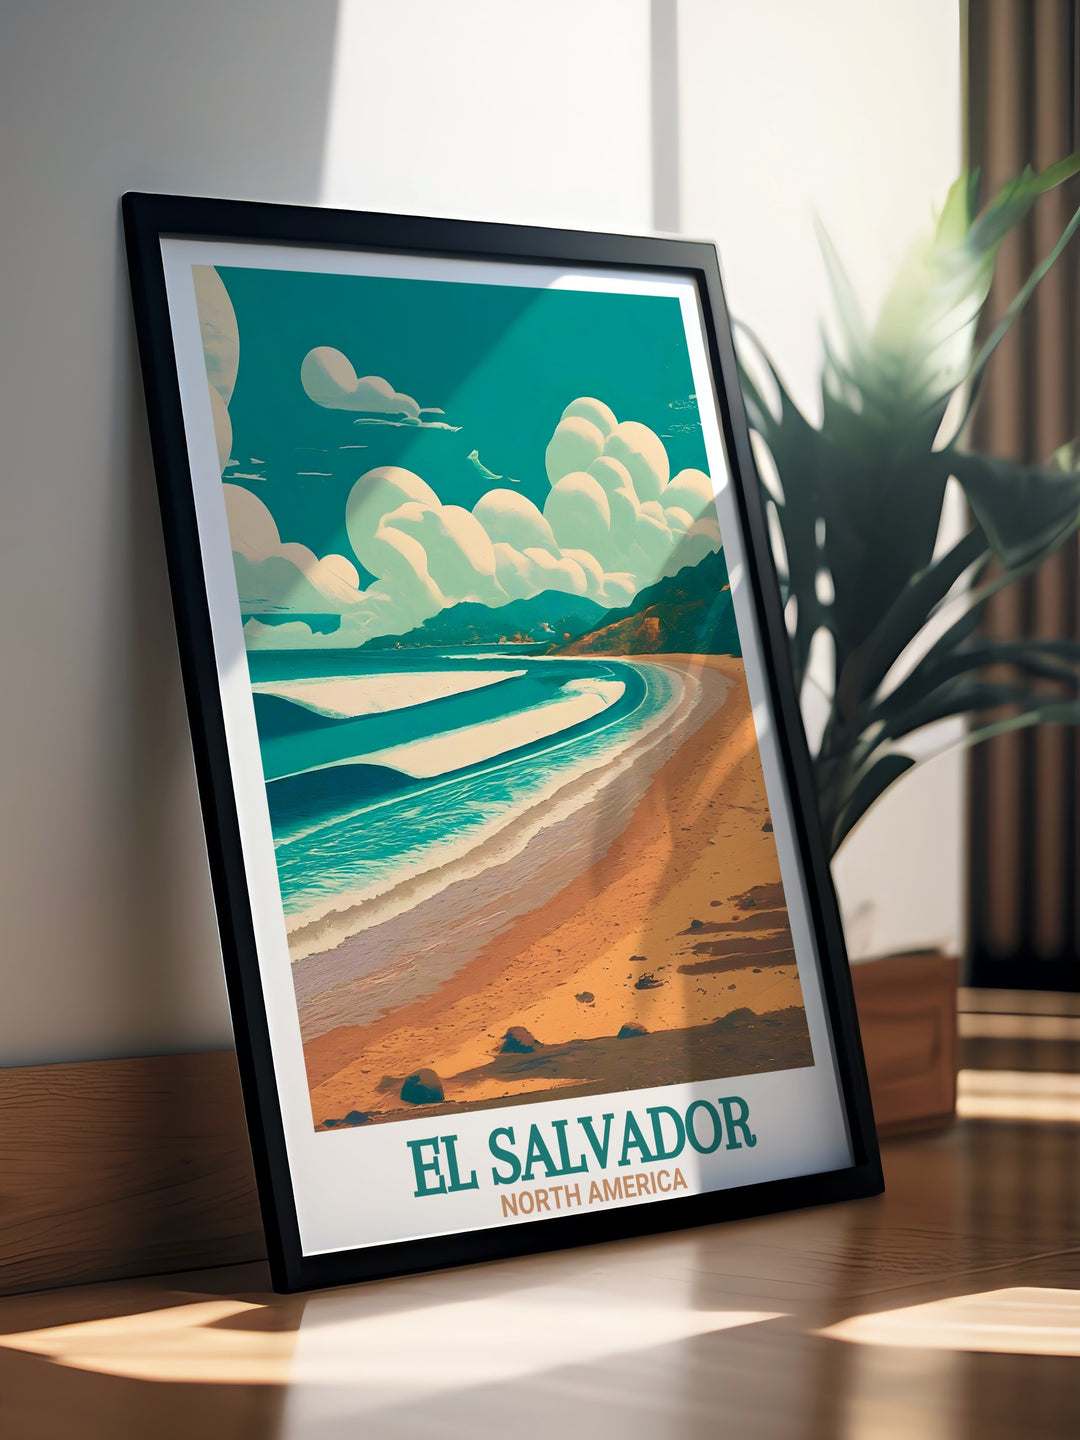 El Tunco Beach artwork in a vintage print style that highlights the stunning beaches of El Salvador a beautiful travel poster that makes an excellent birthday gift or Christmas gift for those who love the charm and culture of El Salvador